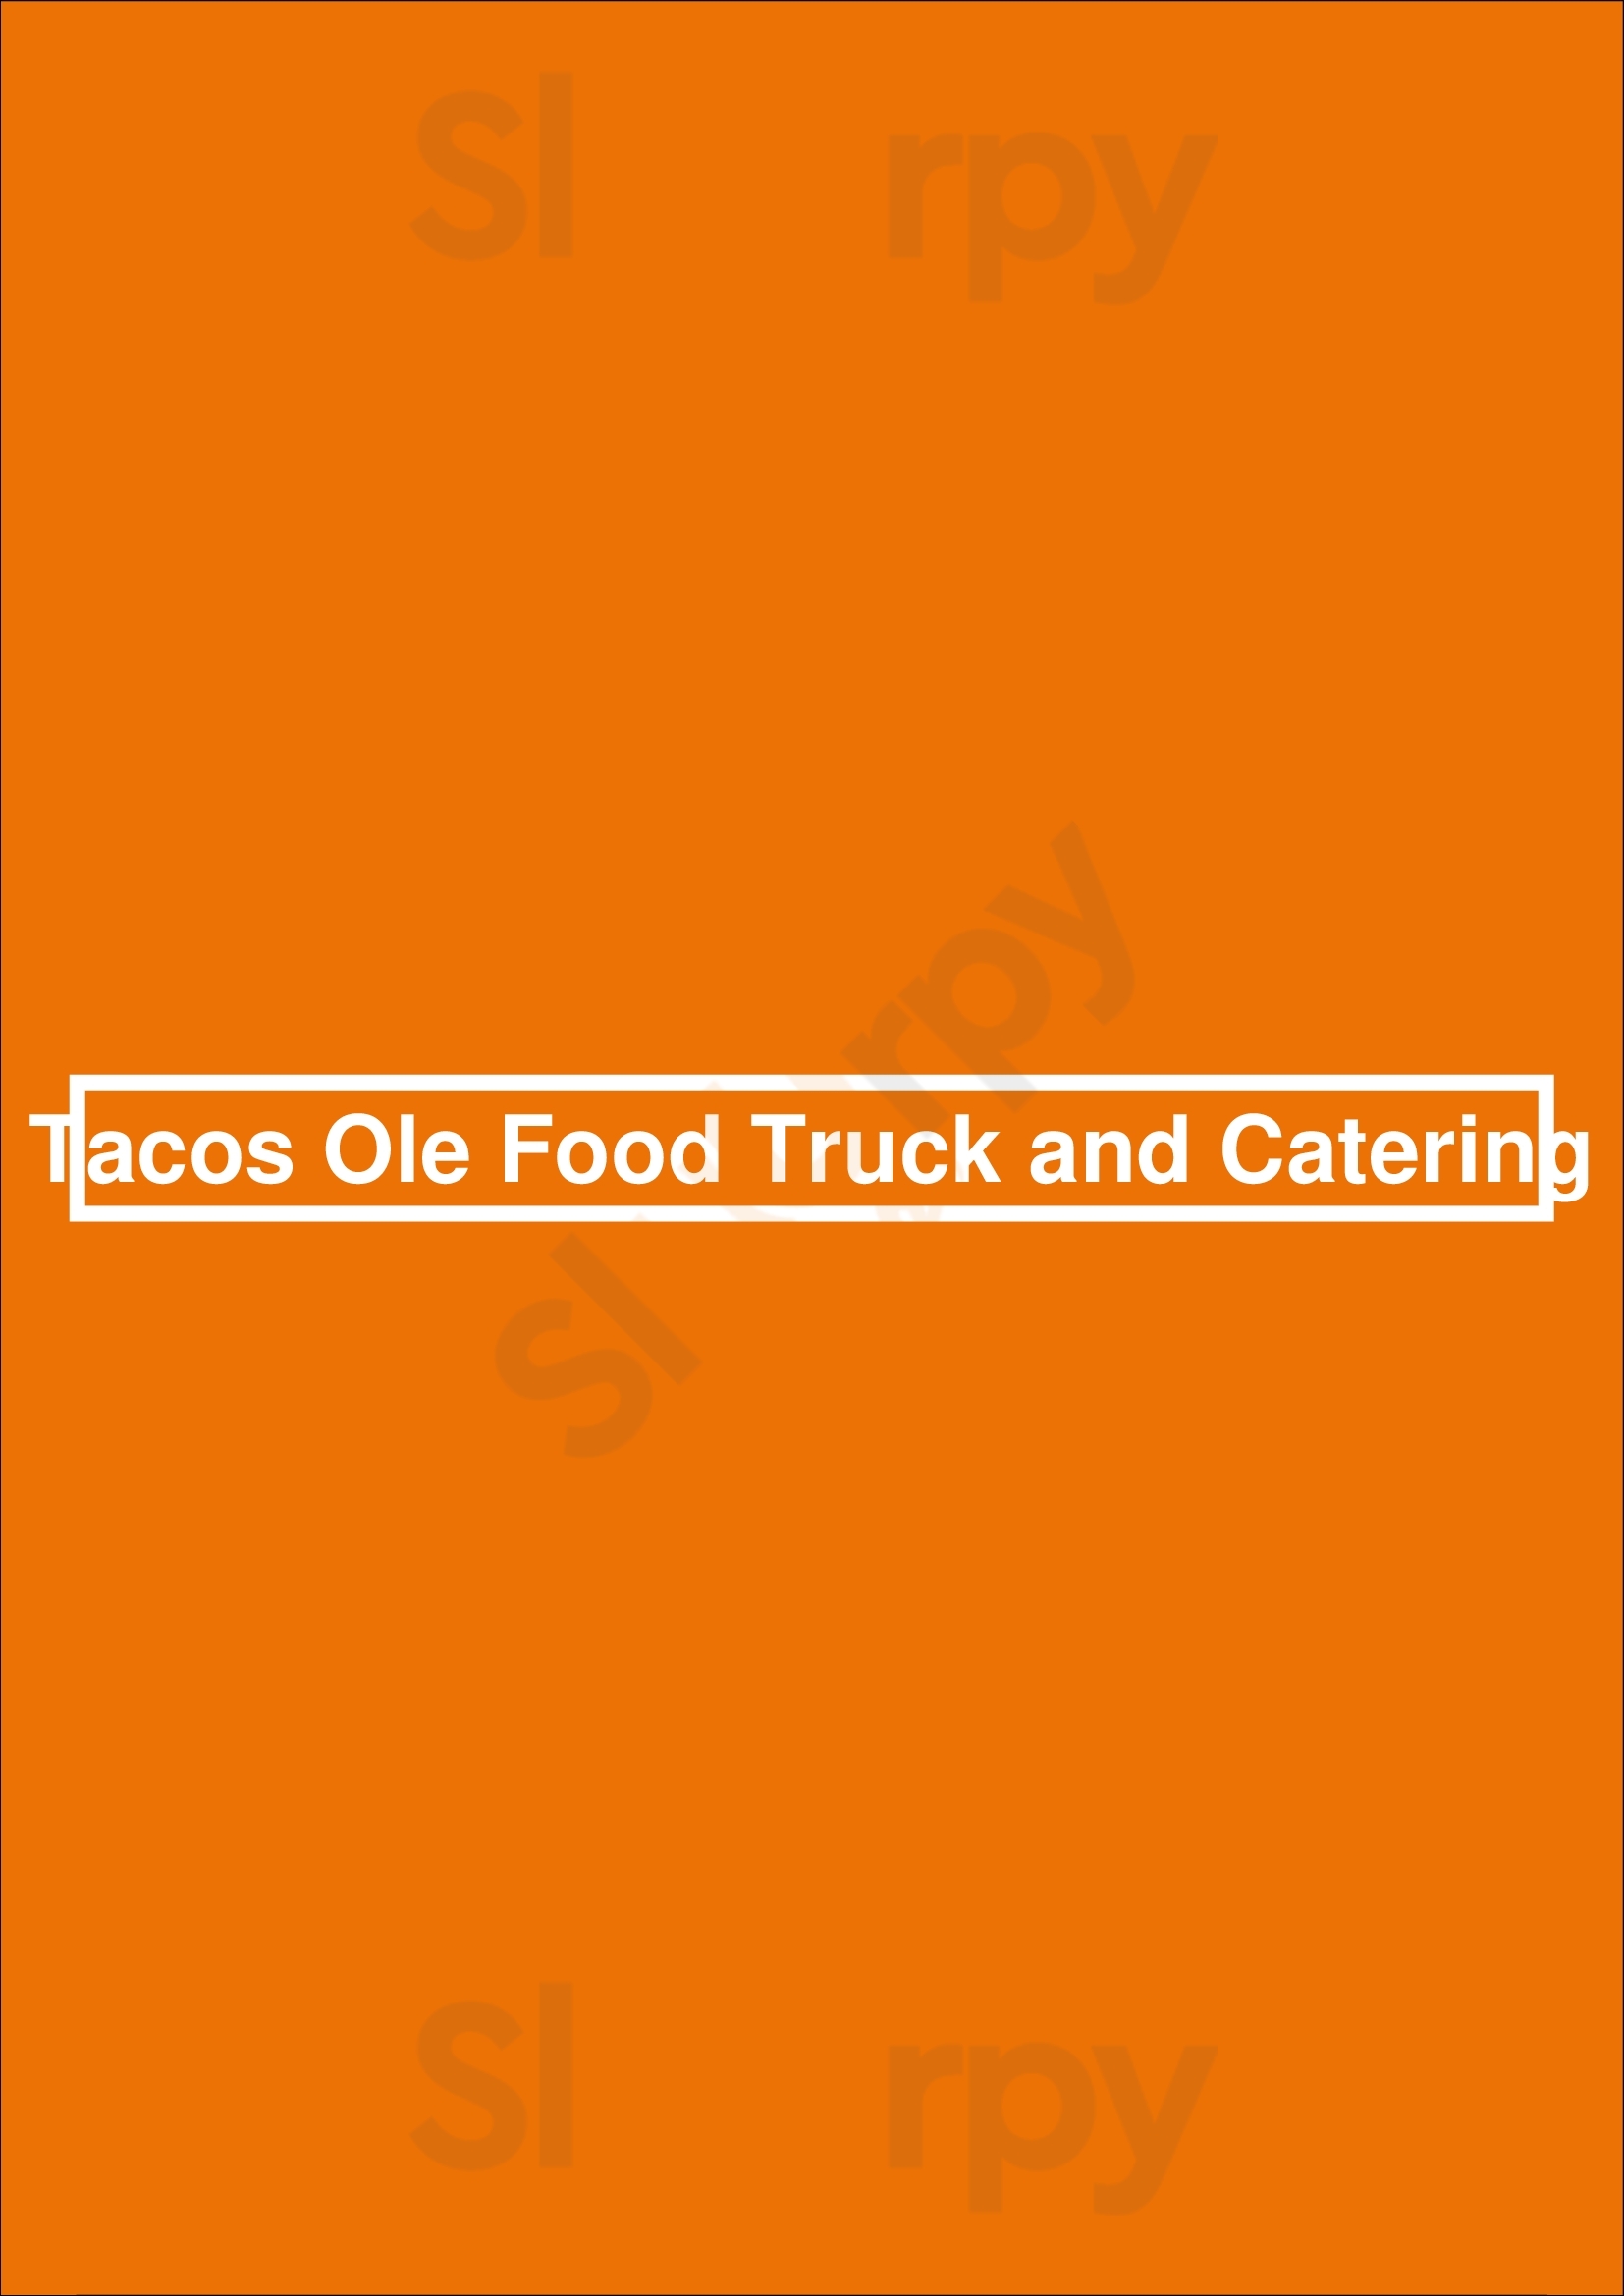 Tacos Ole Food Truck And Catering Houston Menu - 1